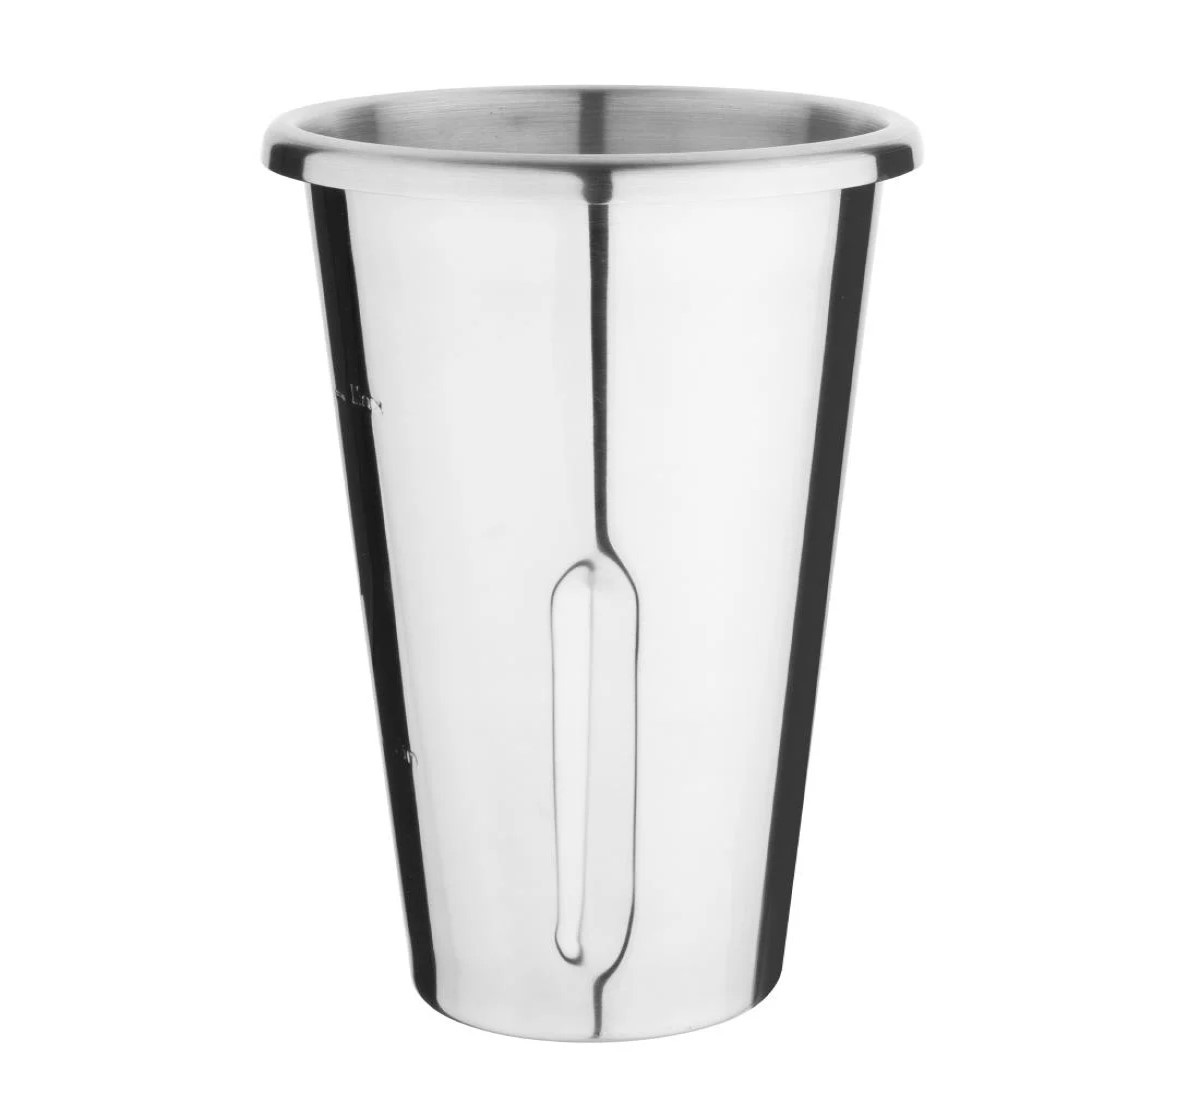 Buffalo Spare Malt Cup For Spindle Drinks Mixer 1L - AK219